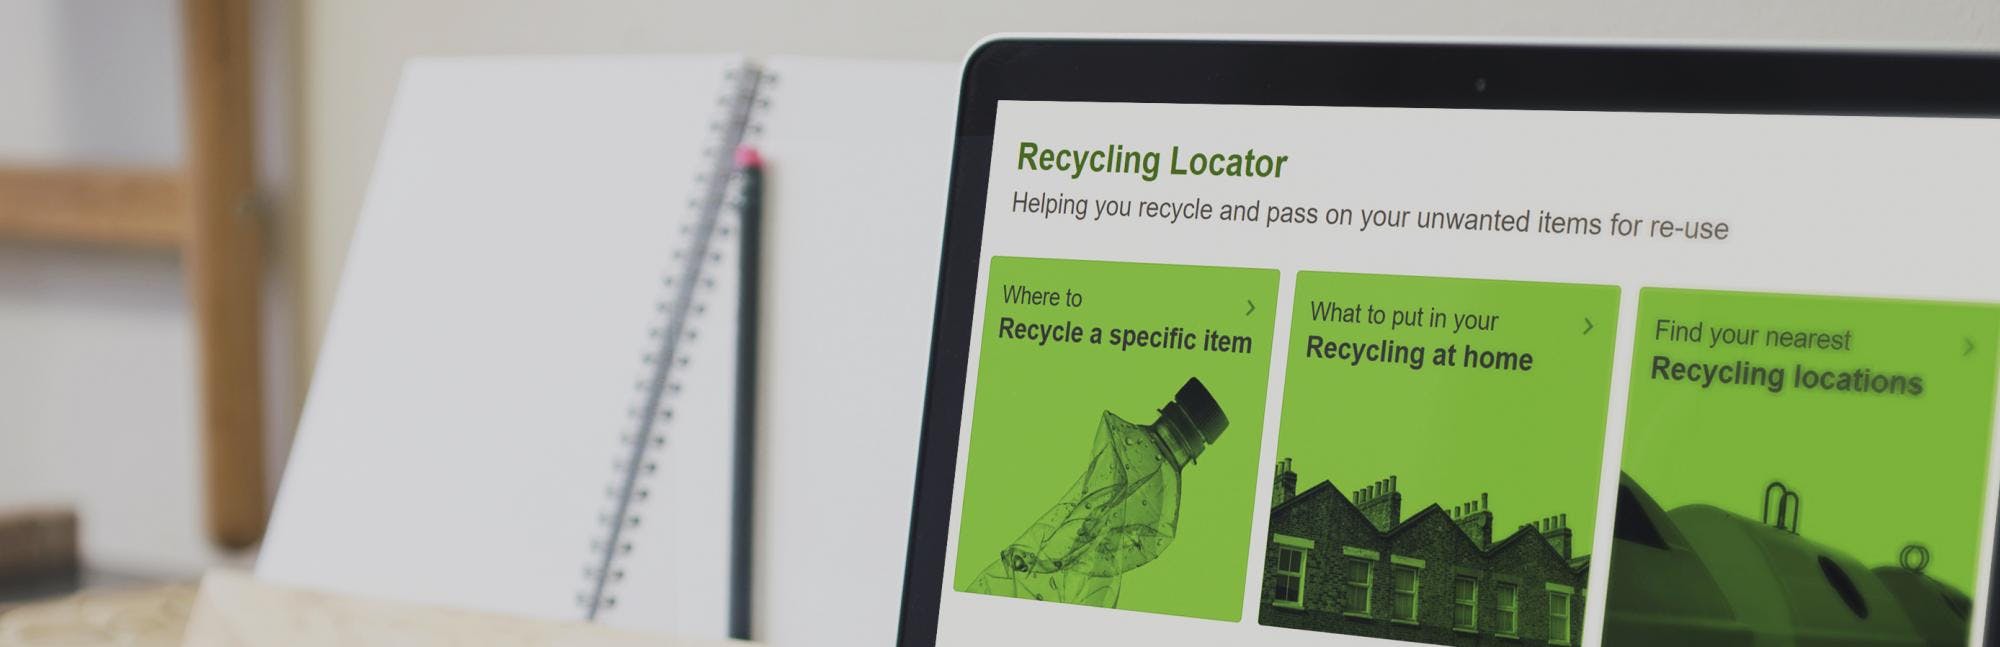 Our Recycling Locator tool